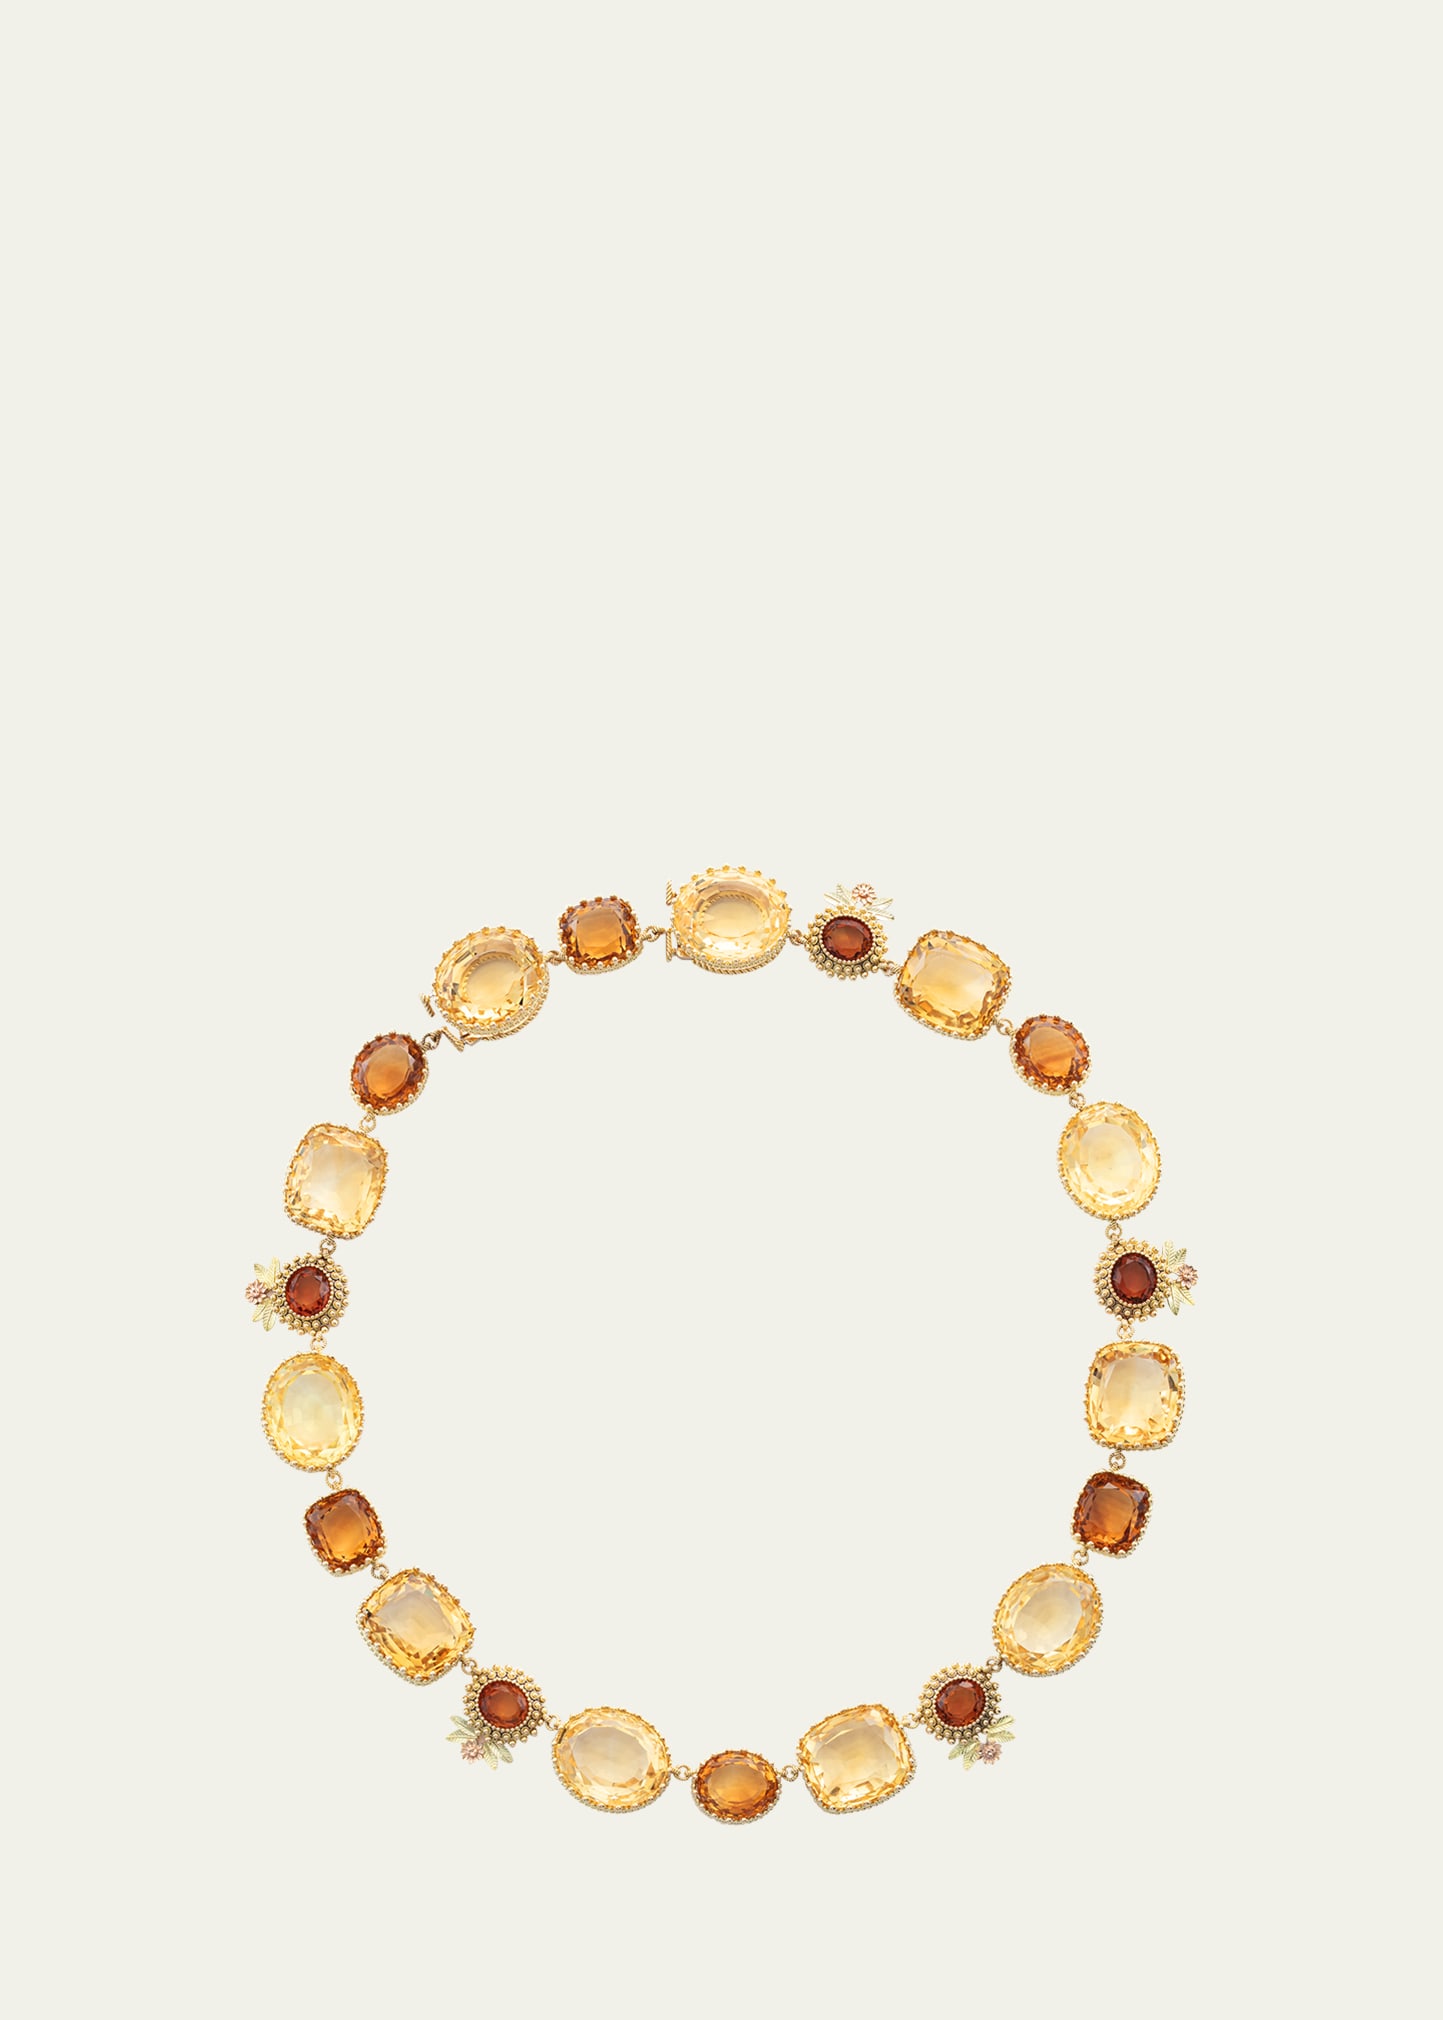 18K Yellow and Pink Gold Pierreries Necklace with Floral Pattern and Citrine